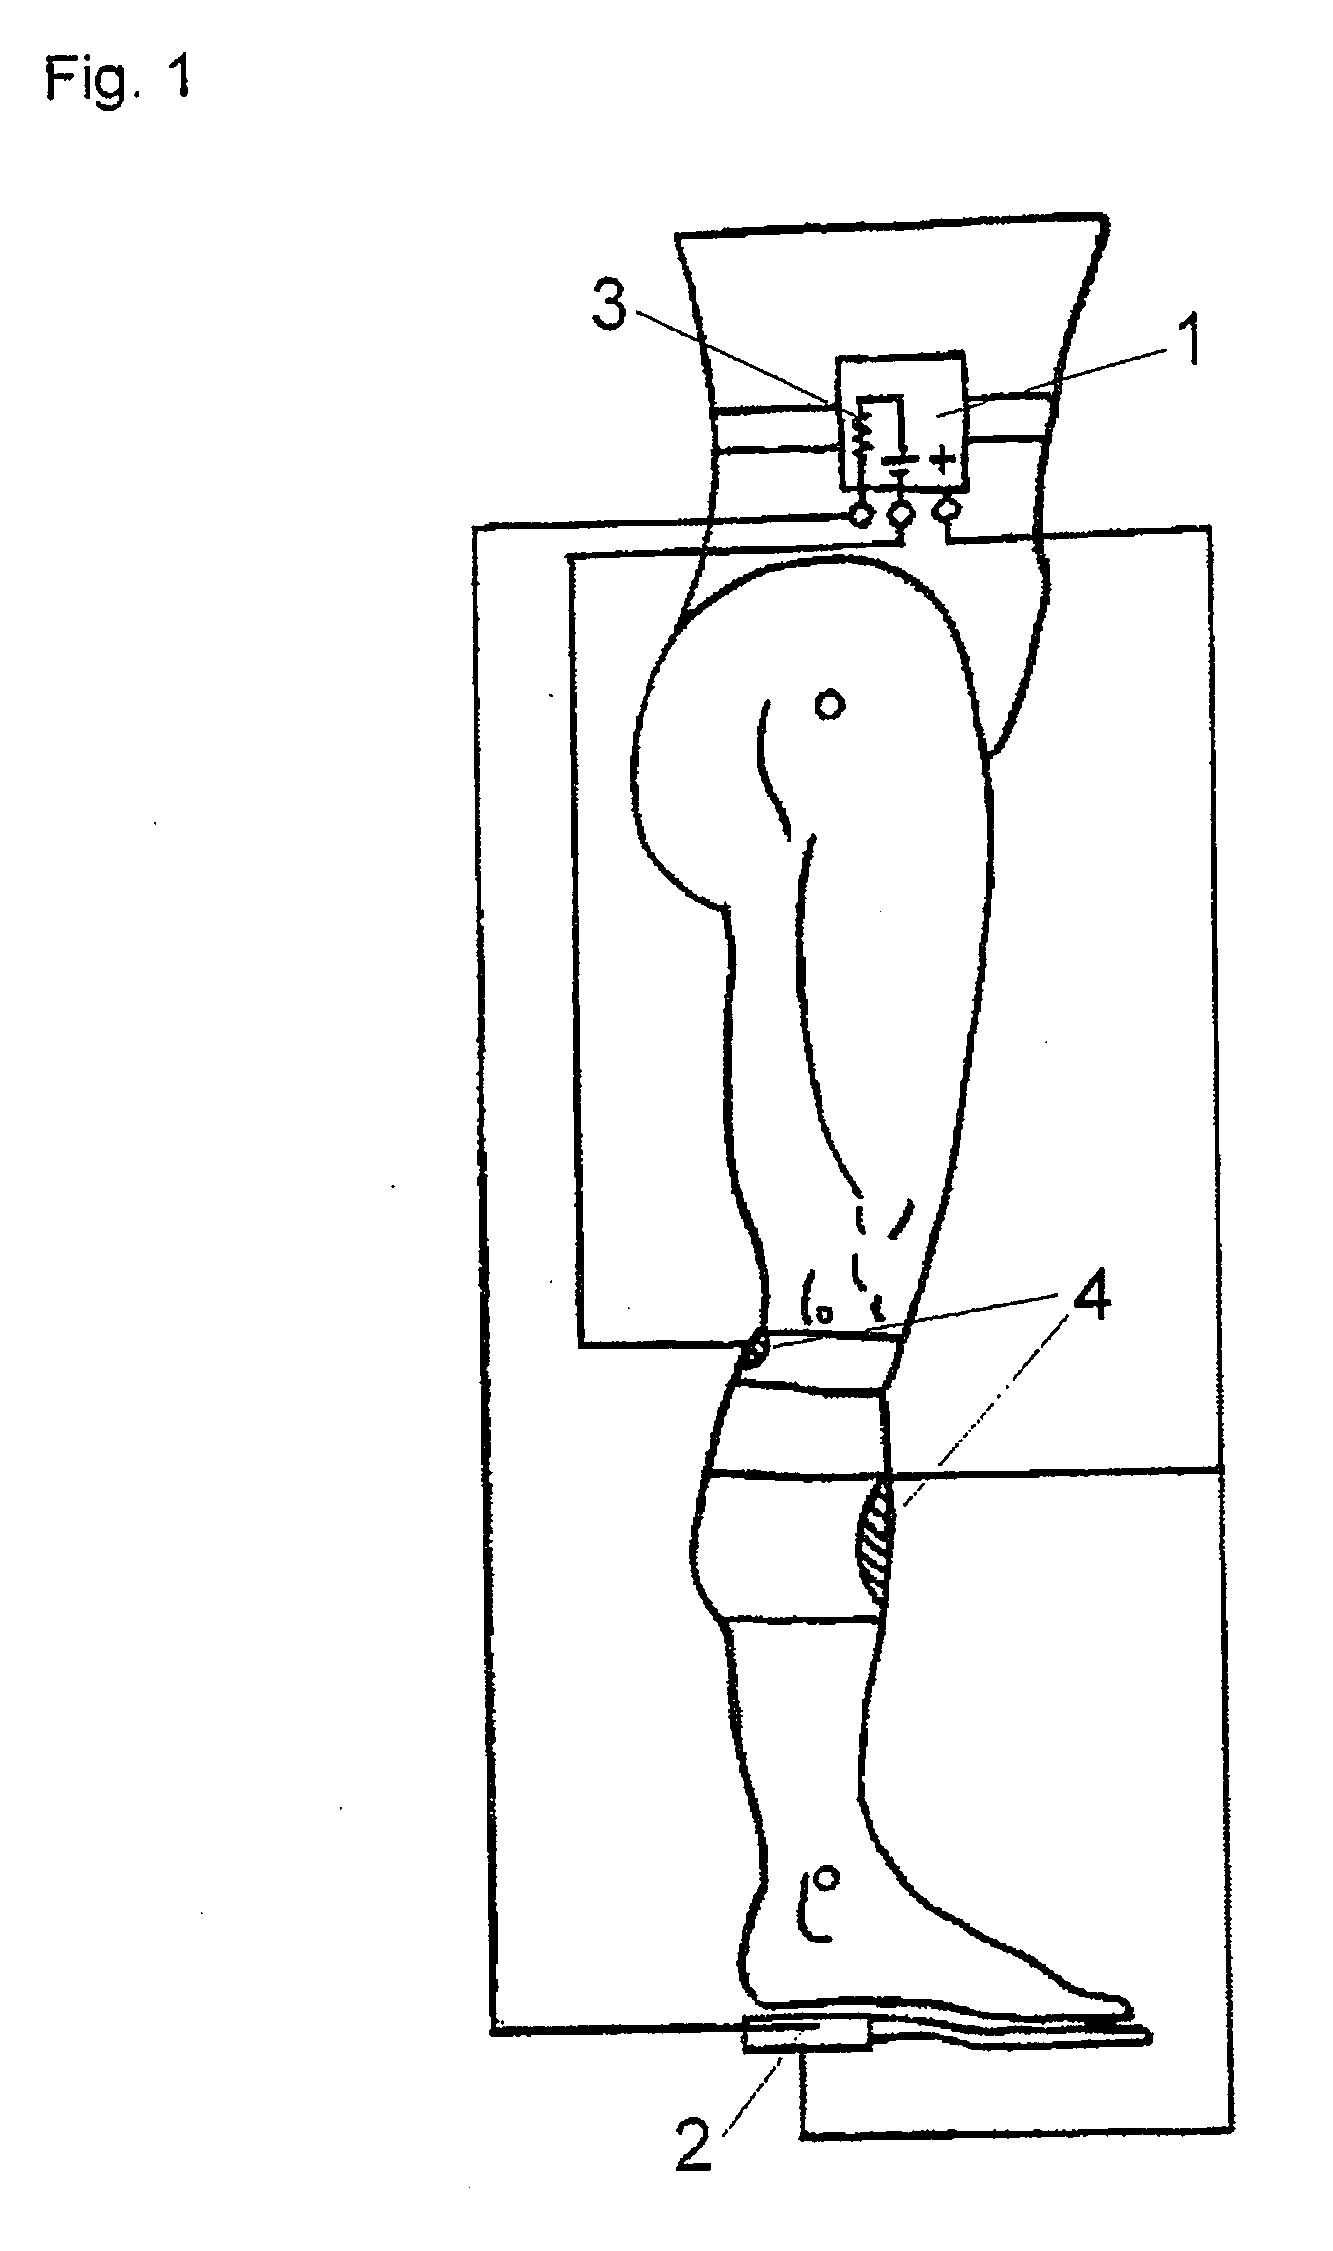 Methods and implantable systems for neural sensing and nerve stimulation